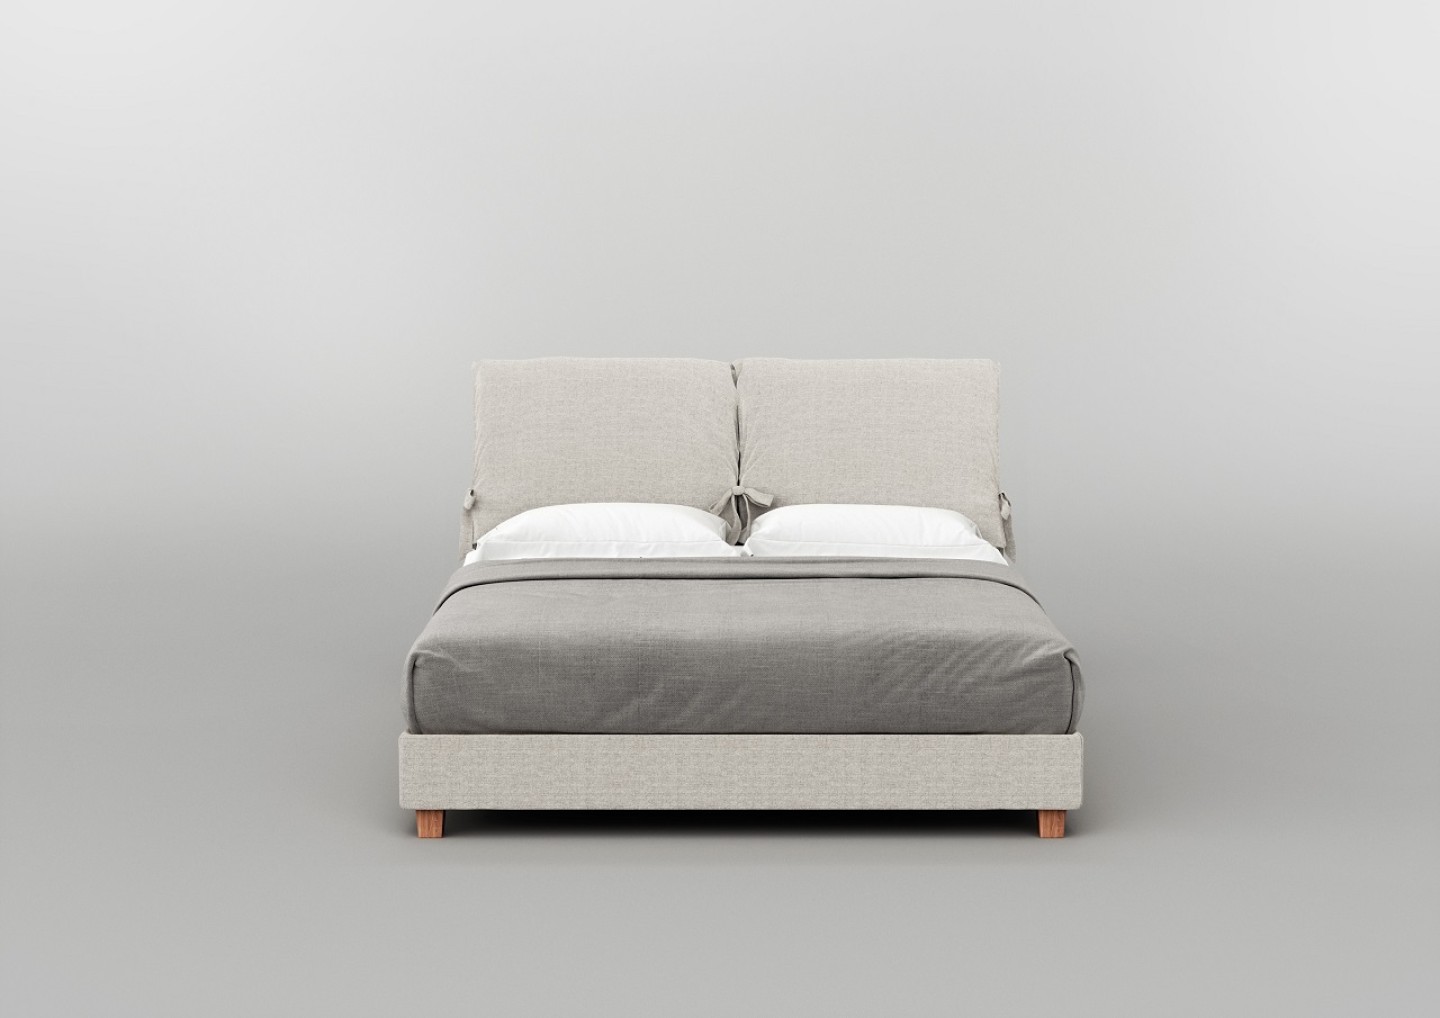 THE SOFT BED by Elite Strom